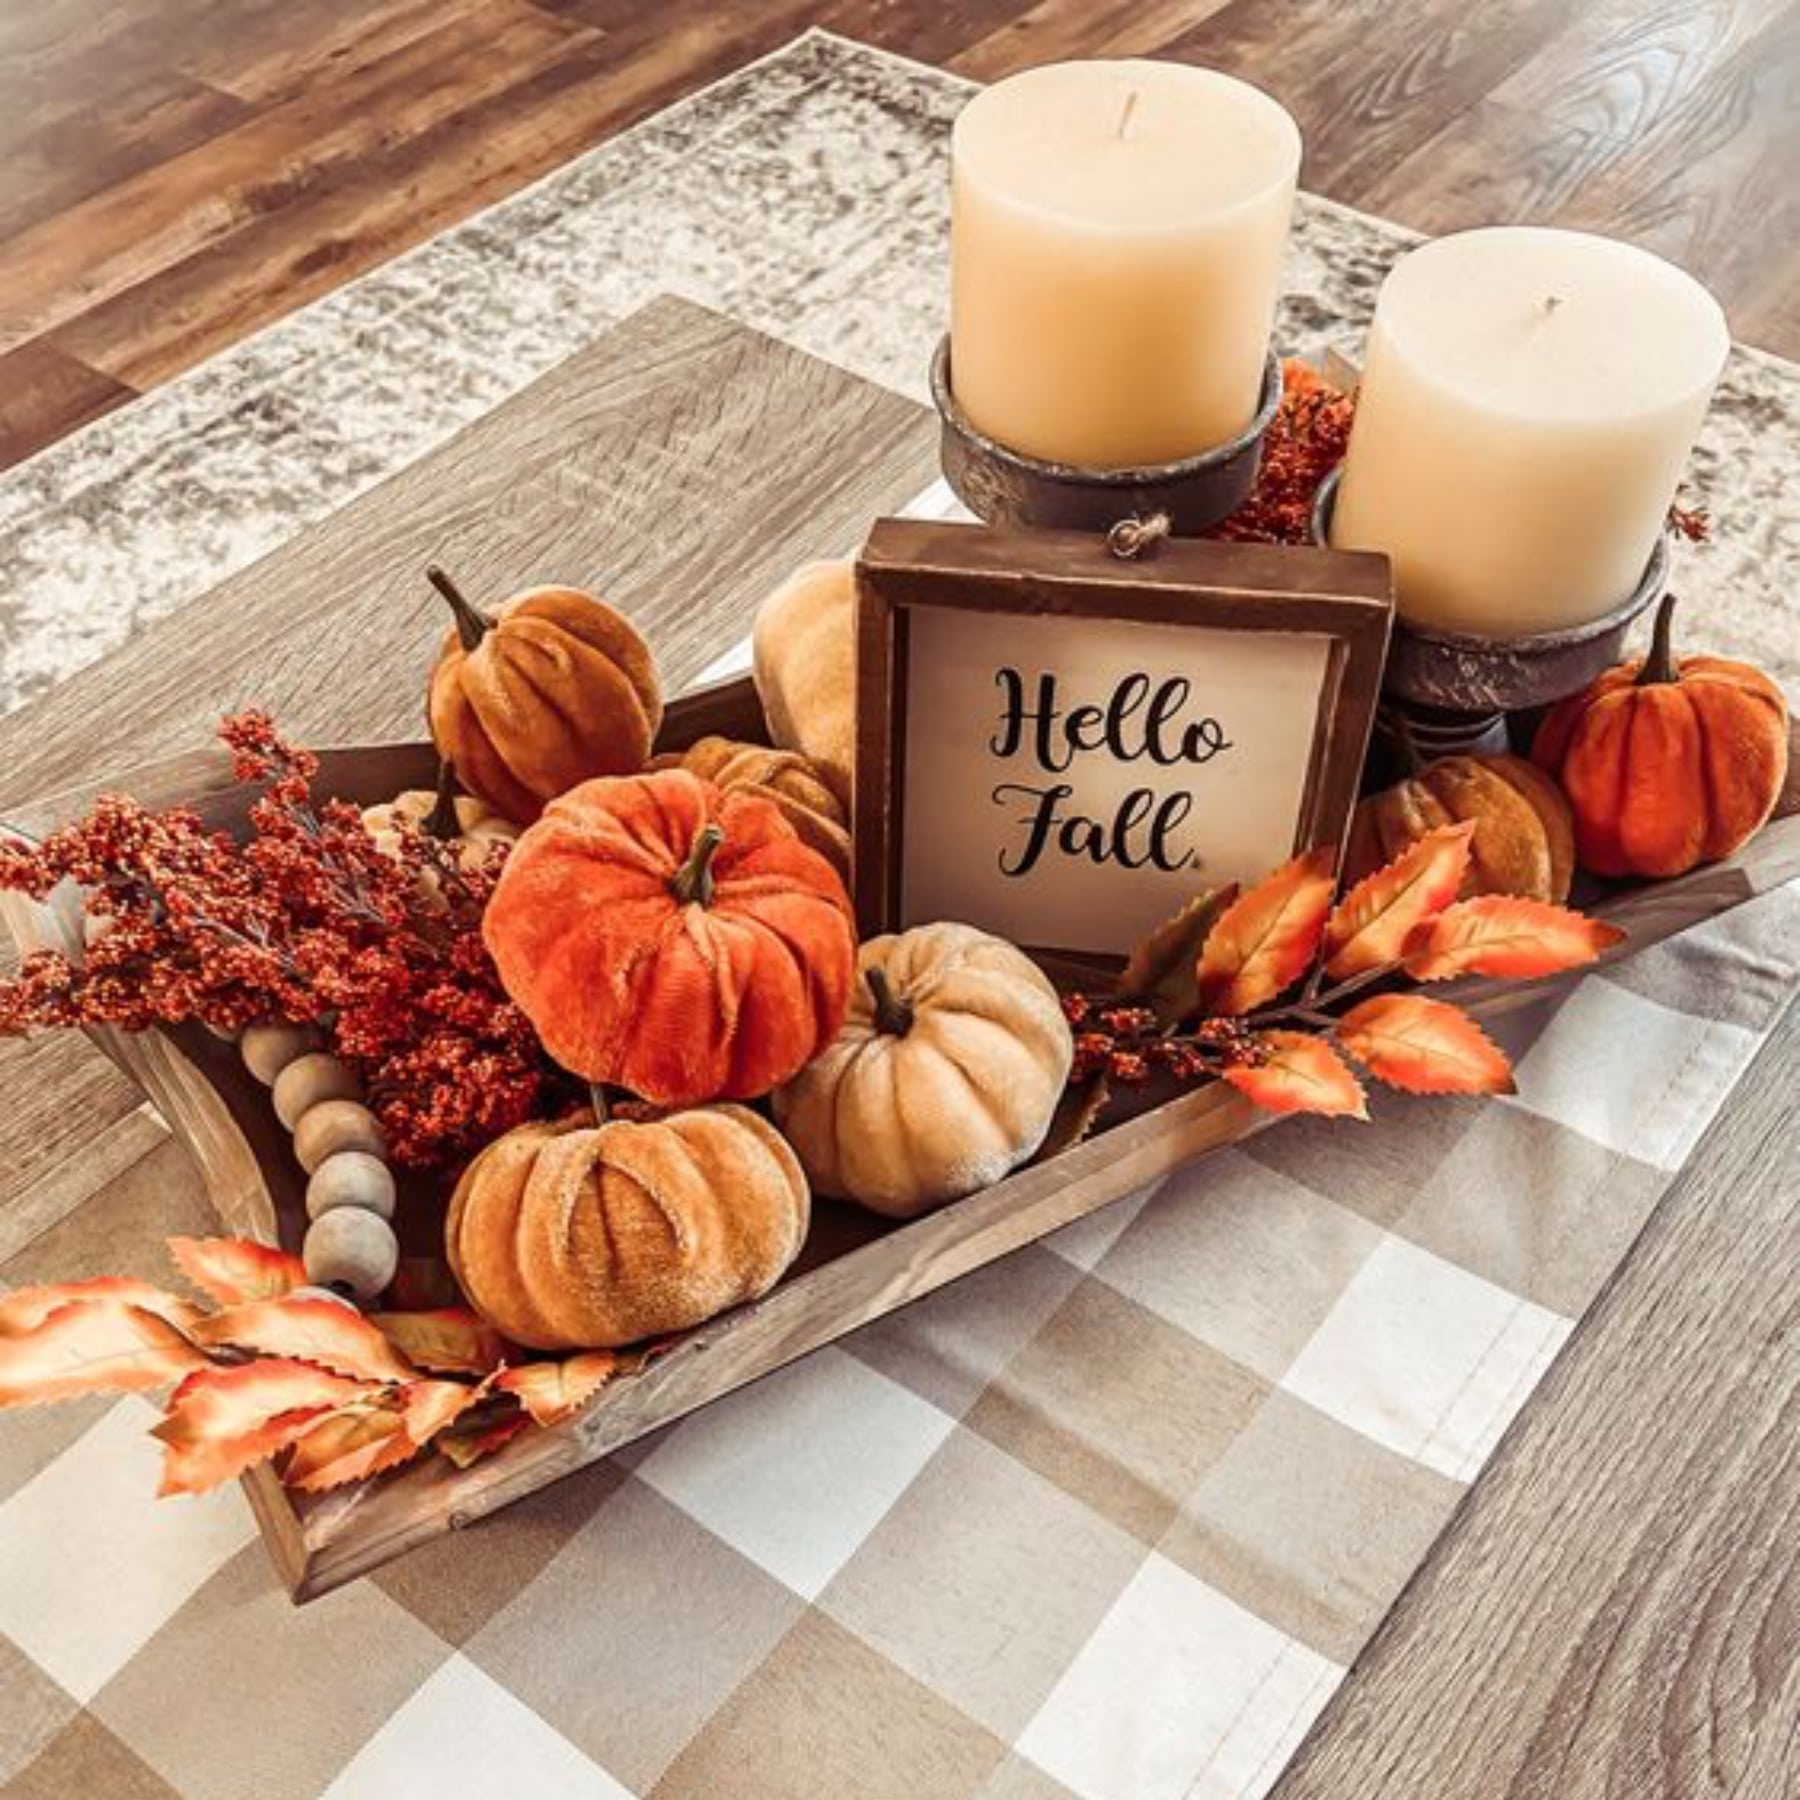 seasonal decor is a great choice for many styles